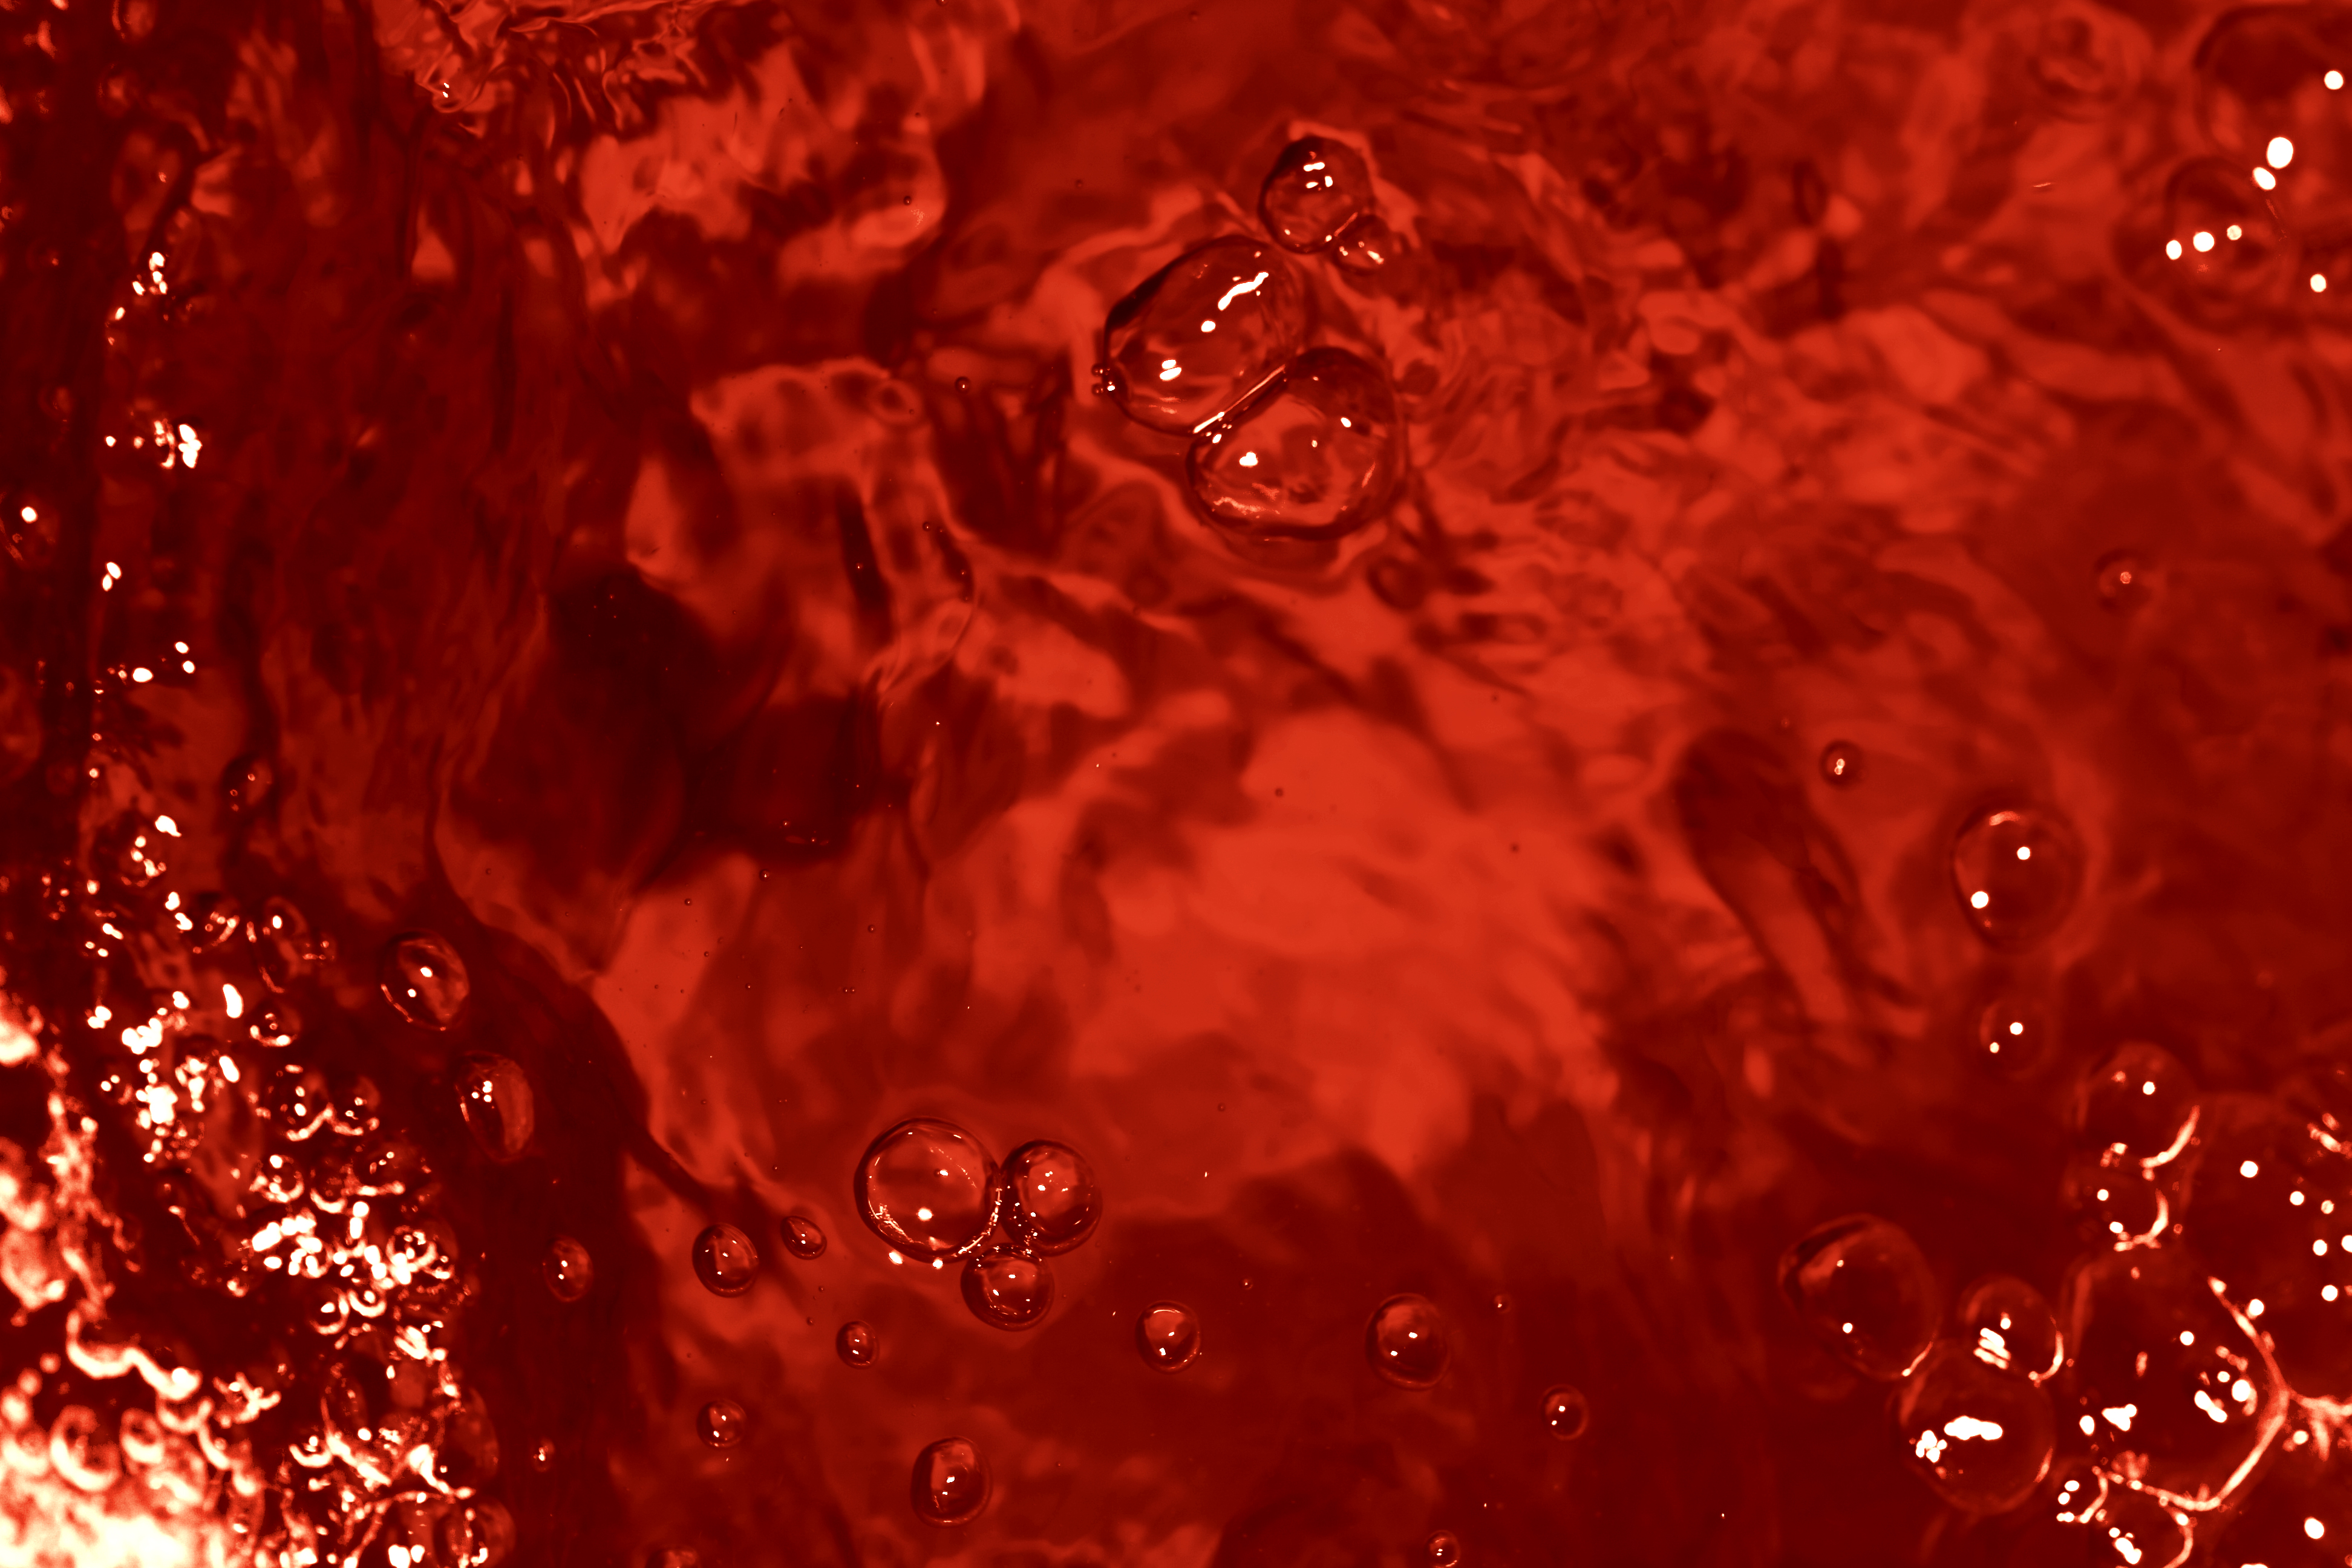 Red water, Abstract, Blood, Liquid, Red, HQ Photo